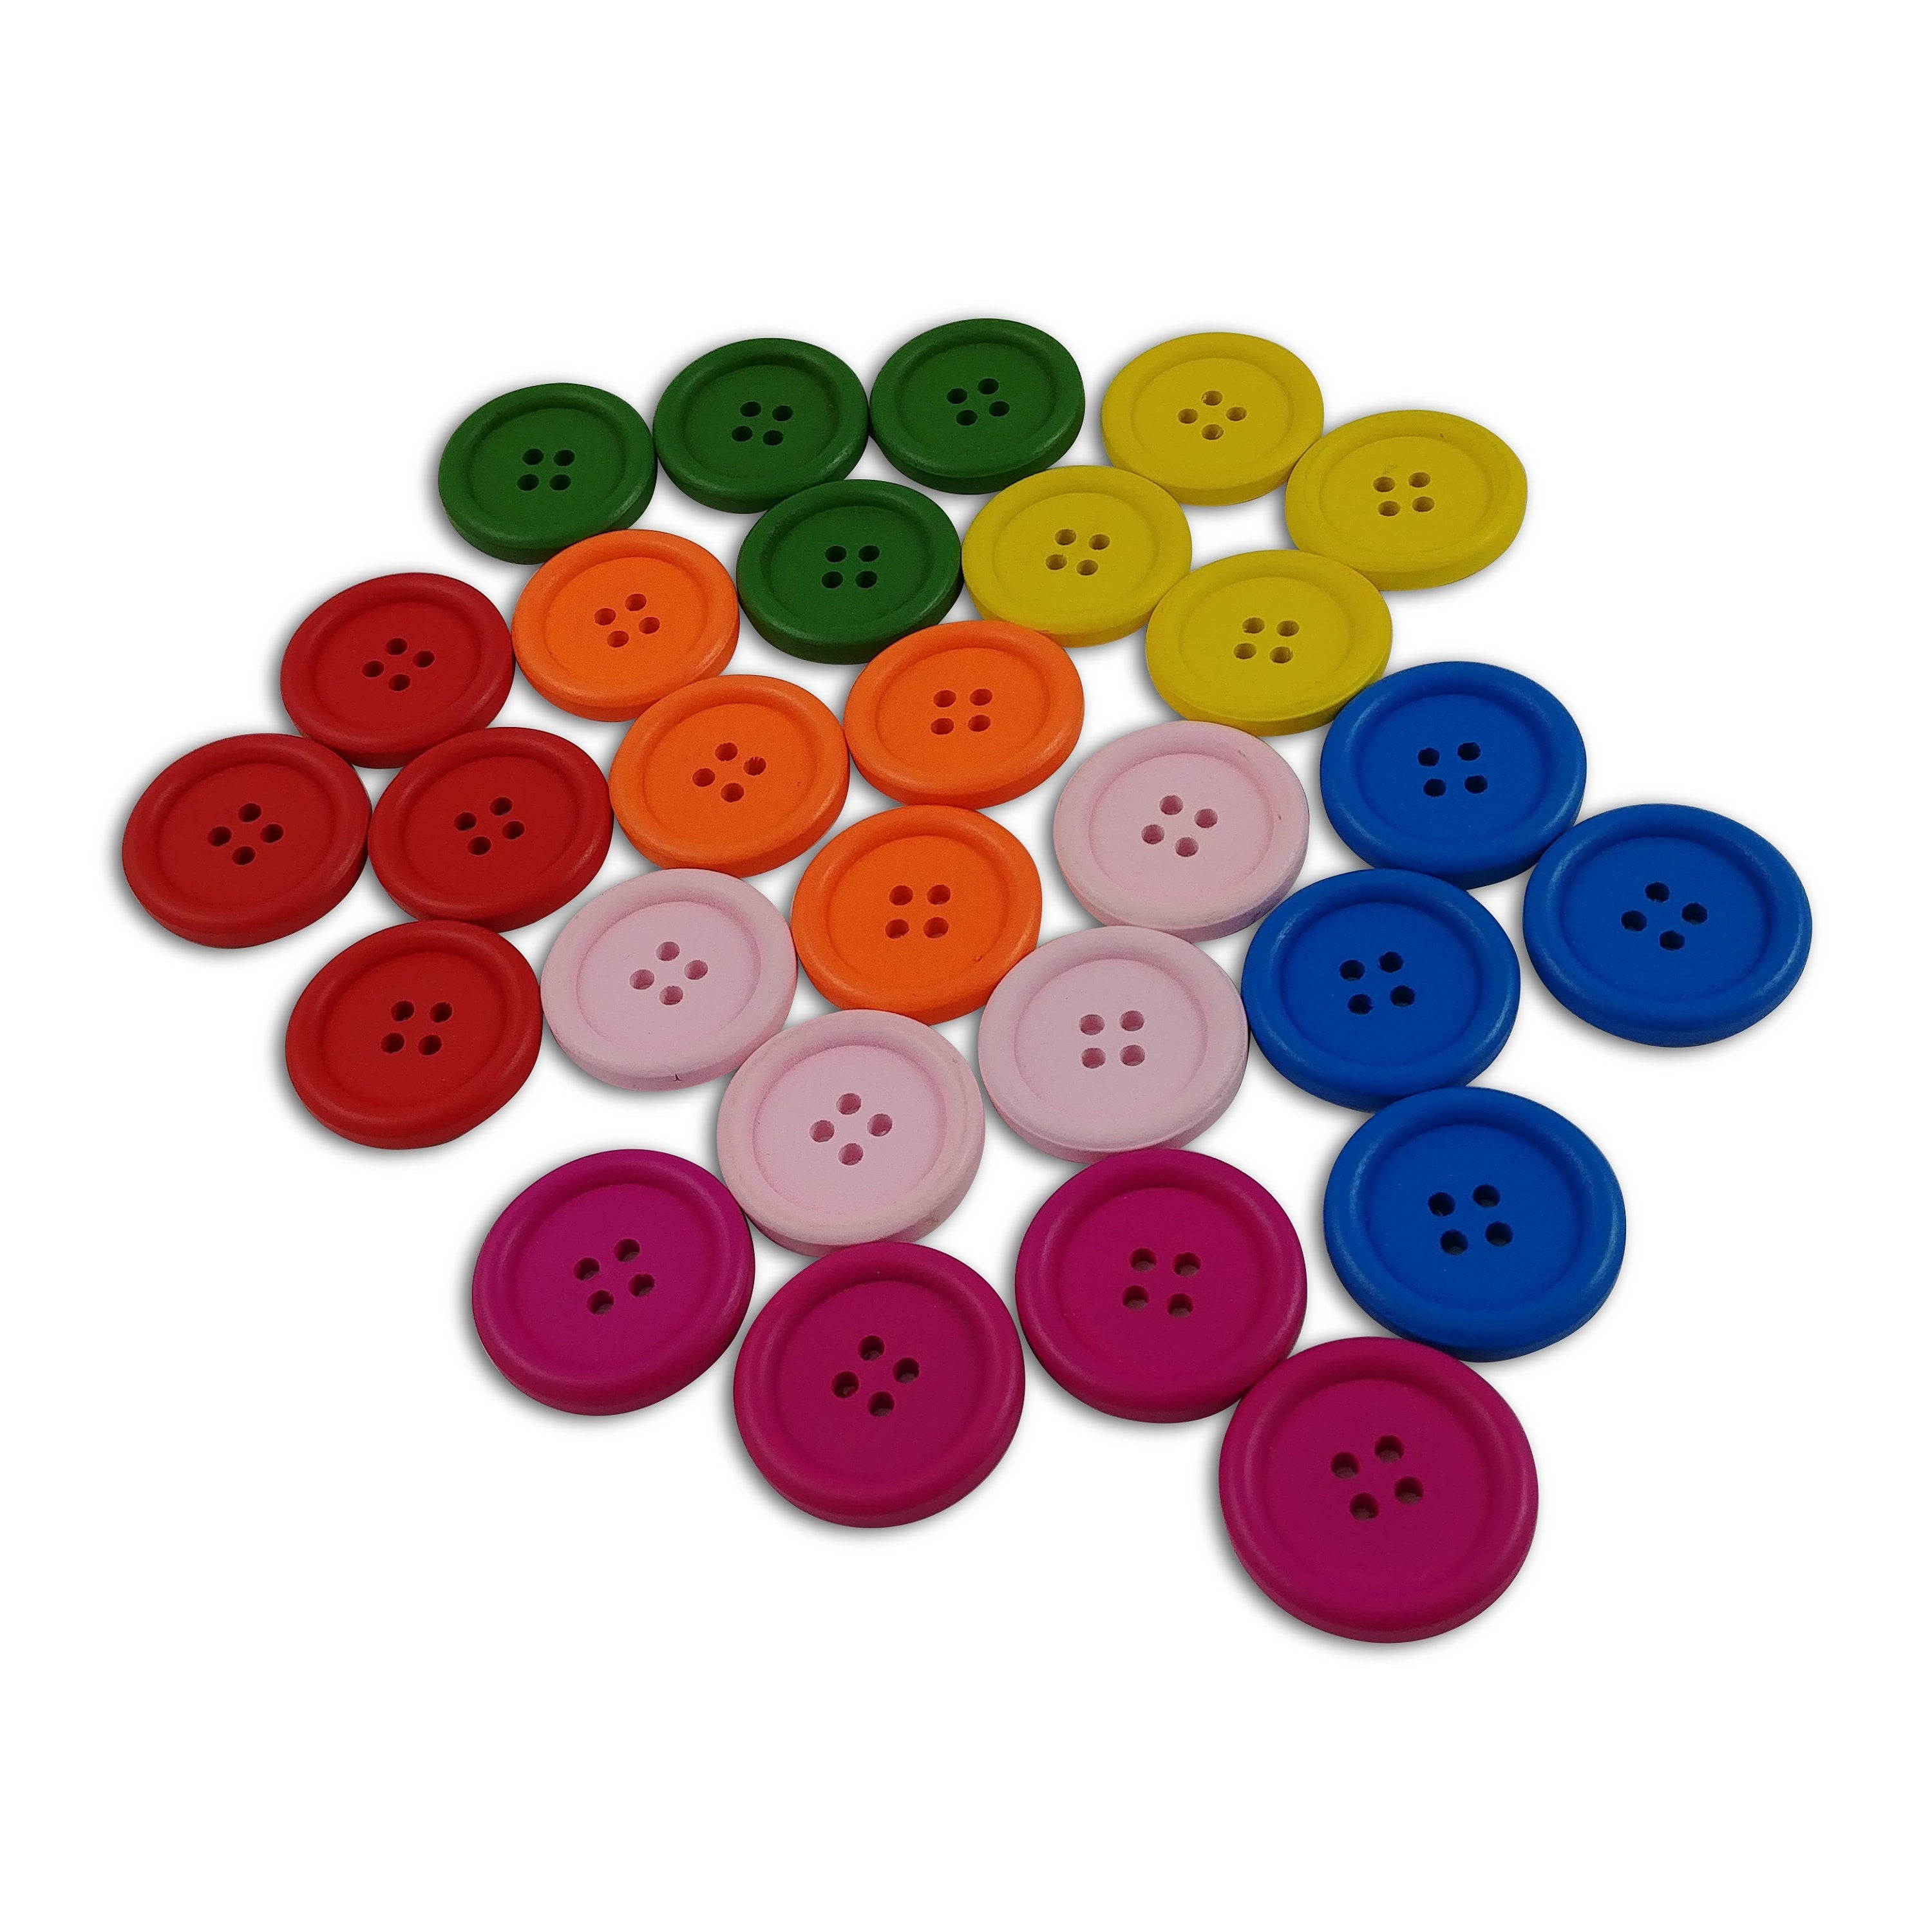 30mm wooden colorful buttons - Set of 4 wood button - Choose your color